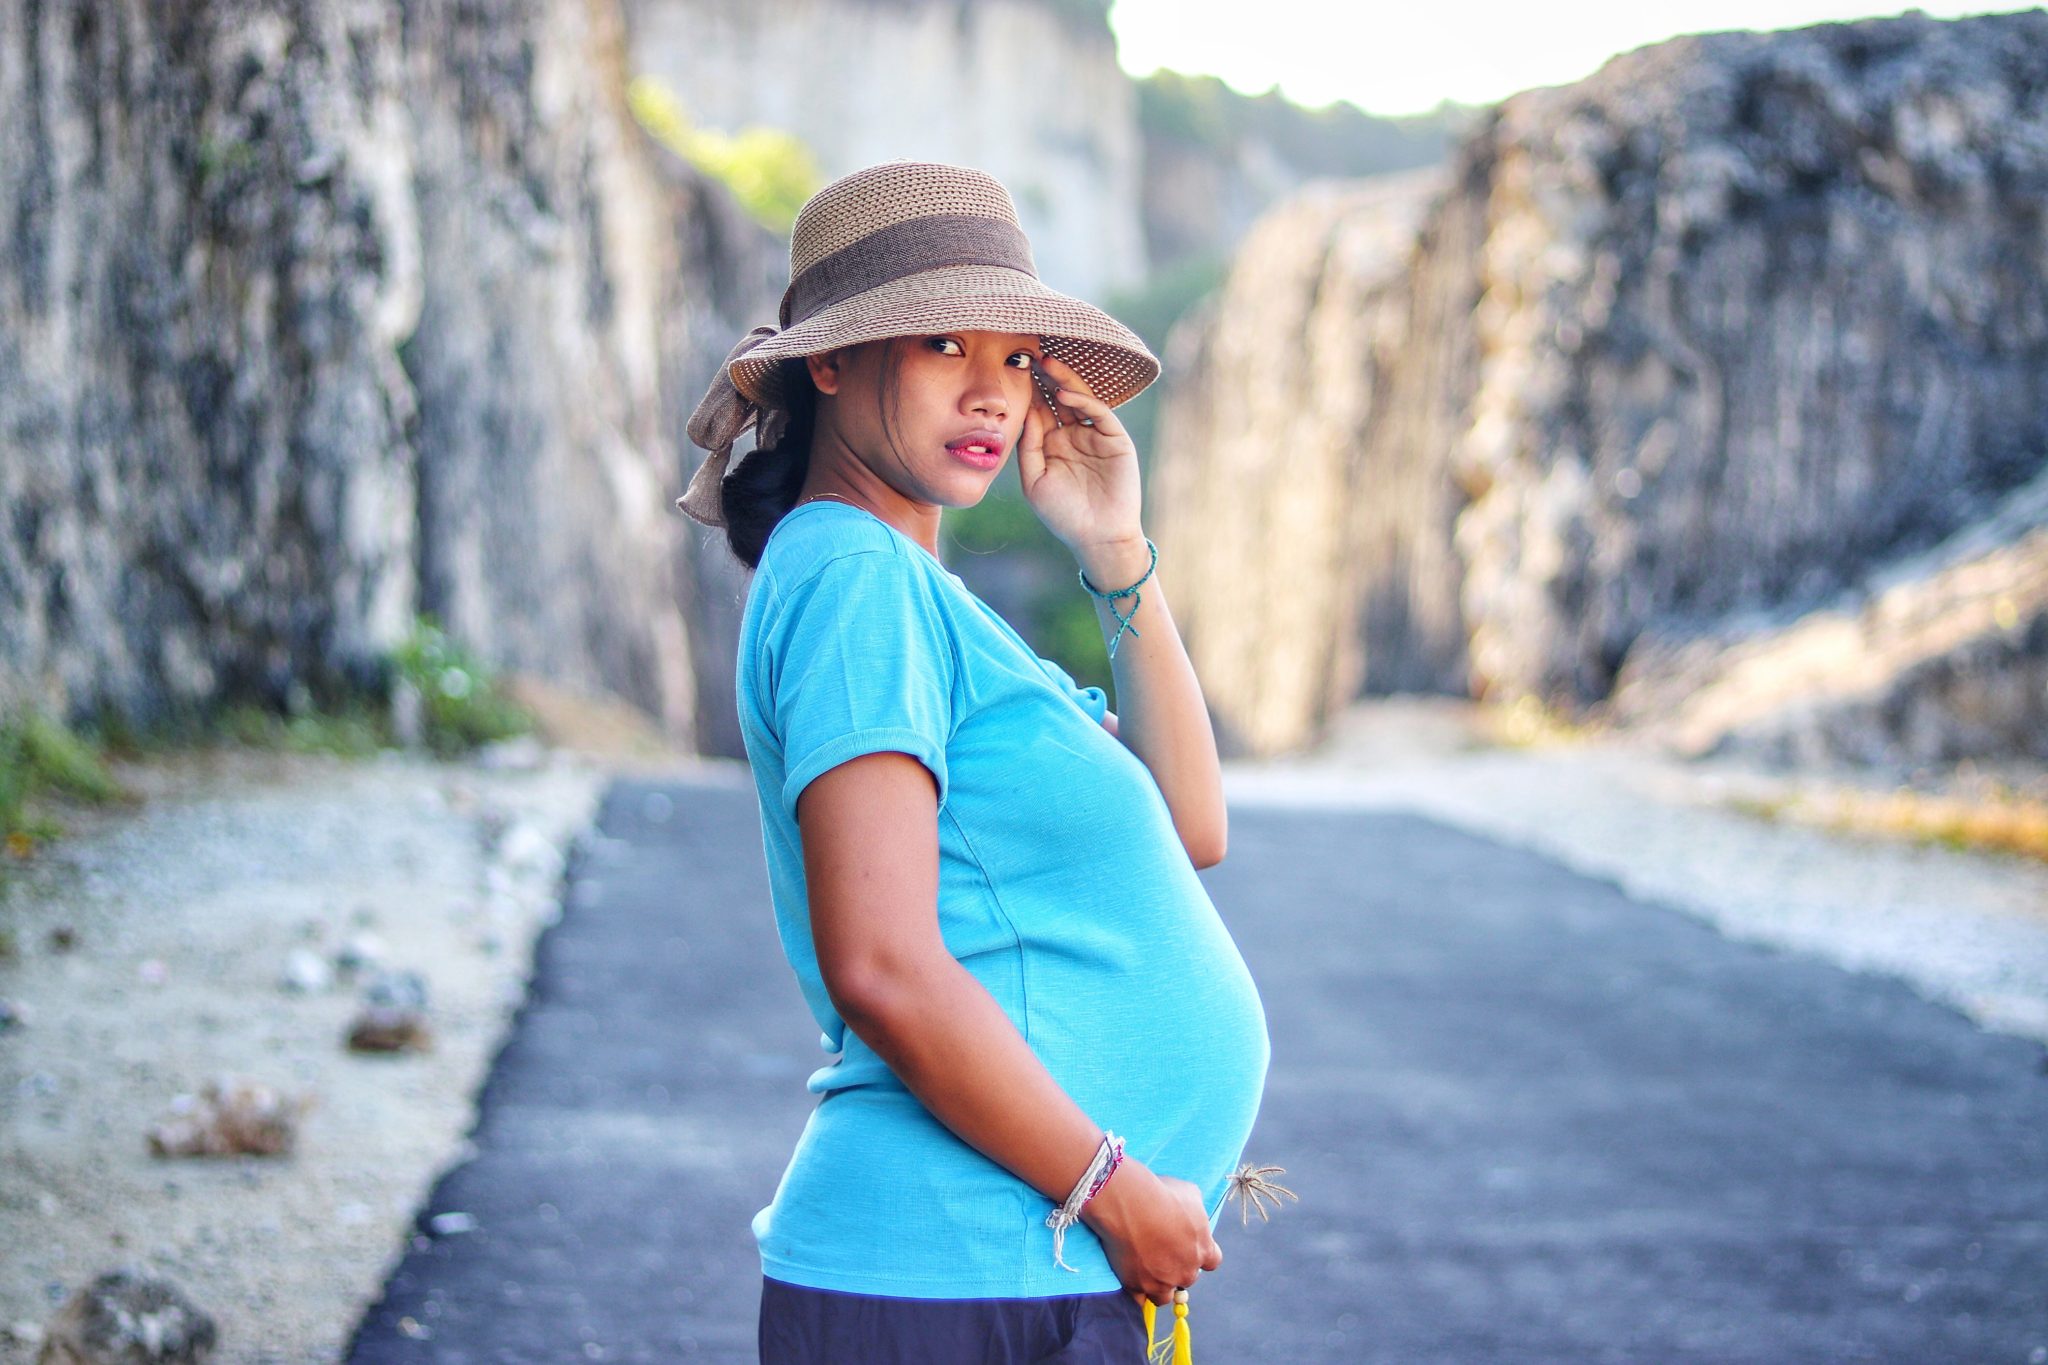 exercise will help you cope with first trimester